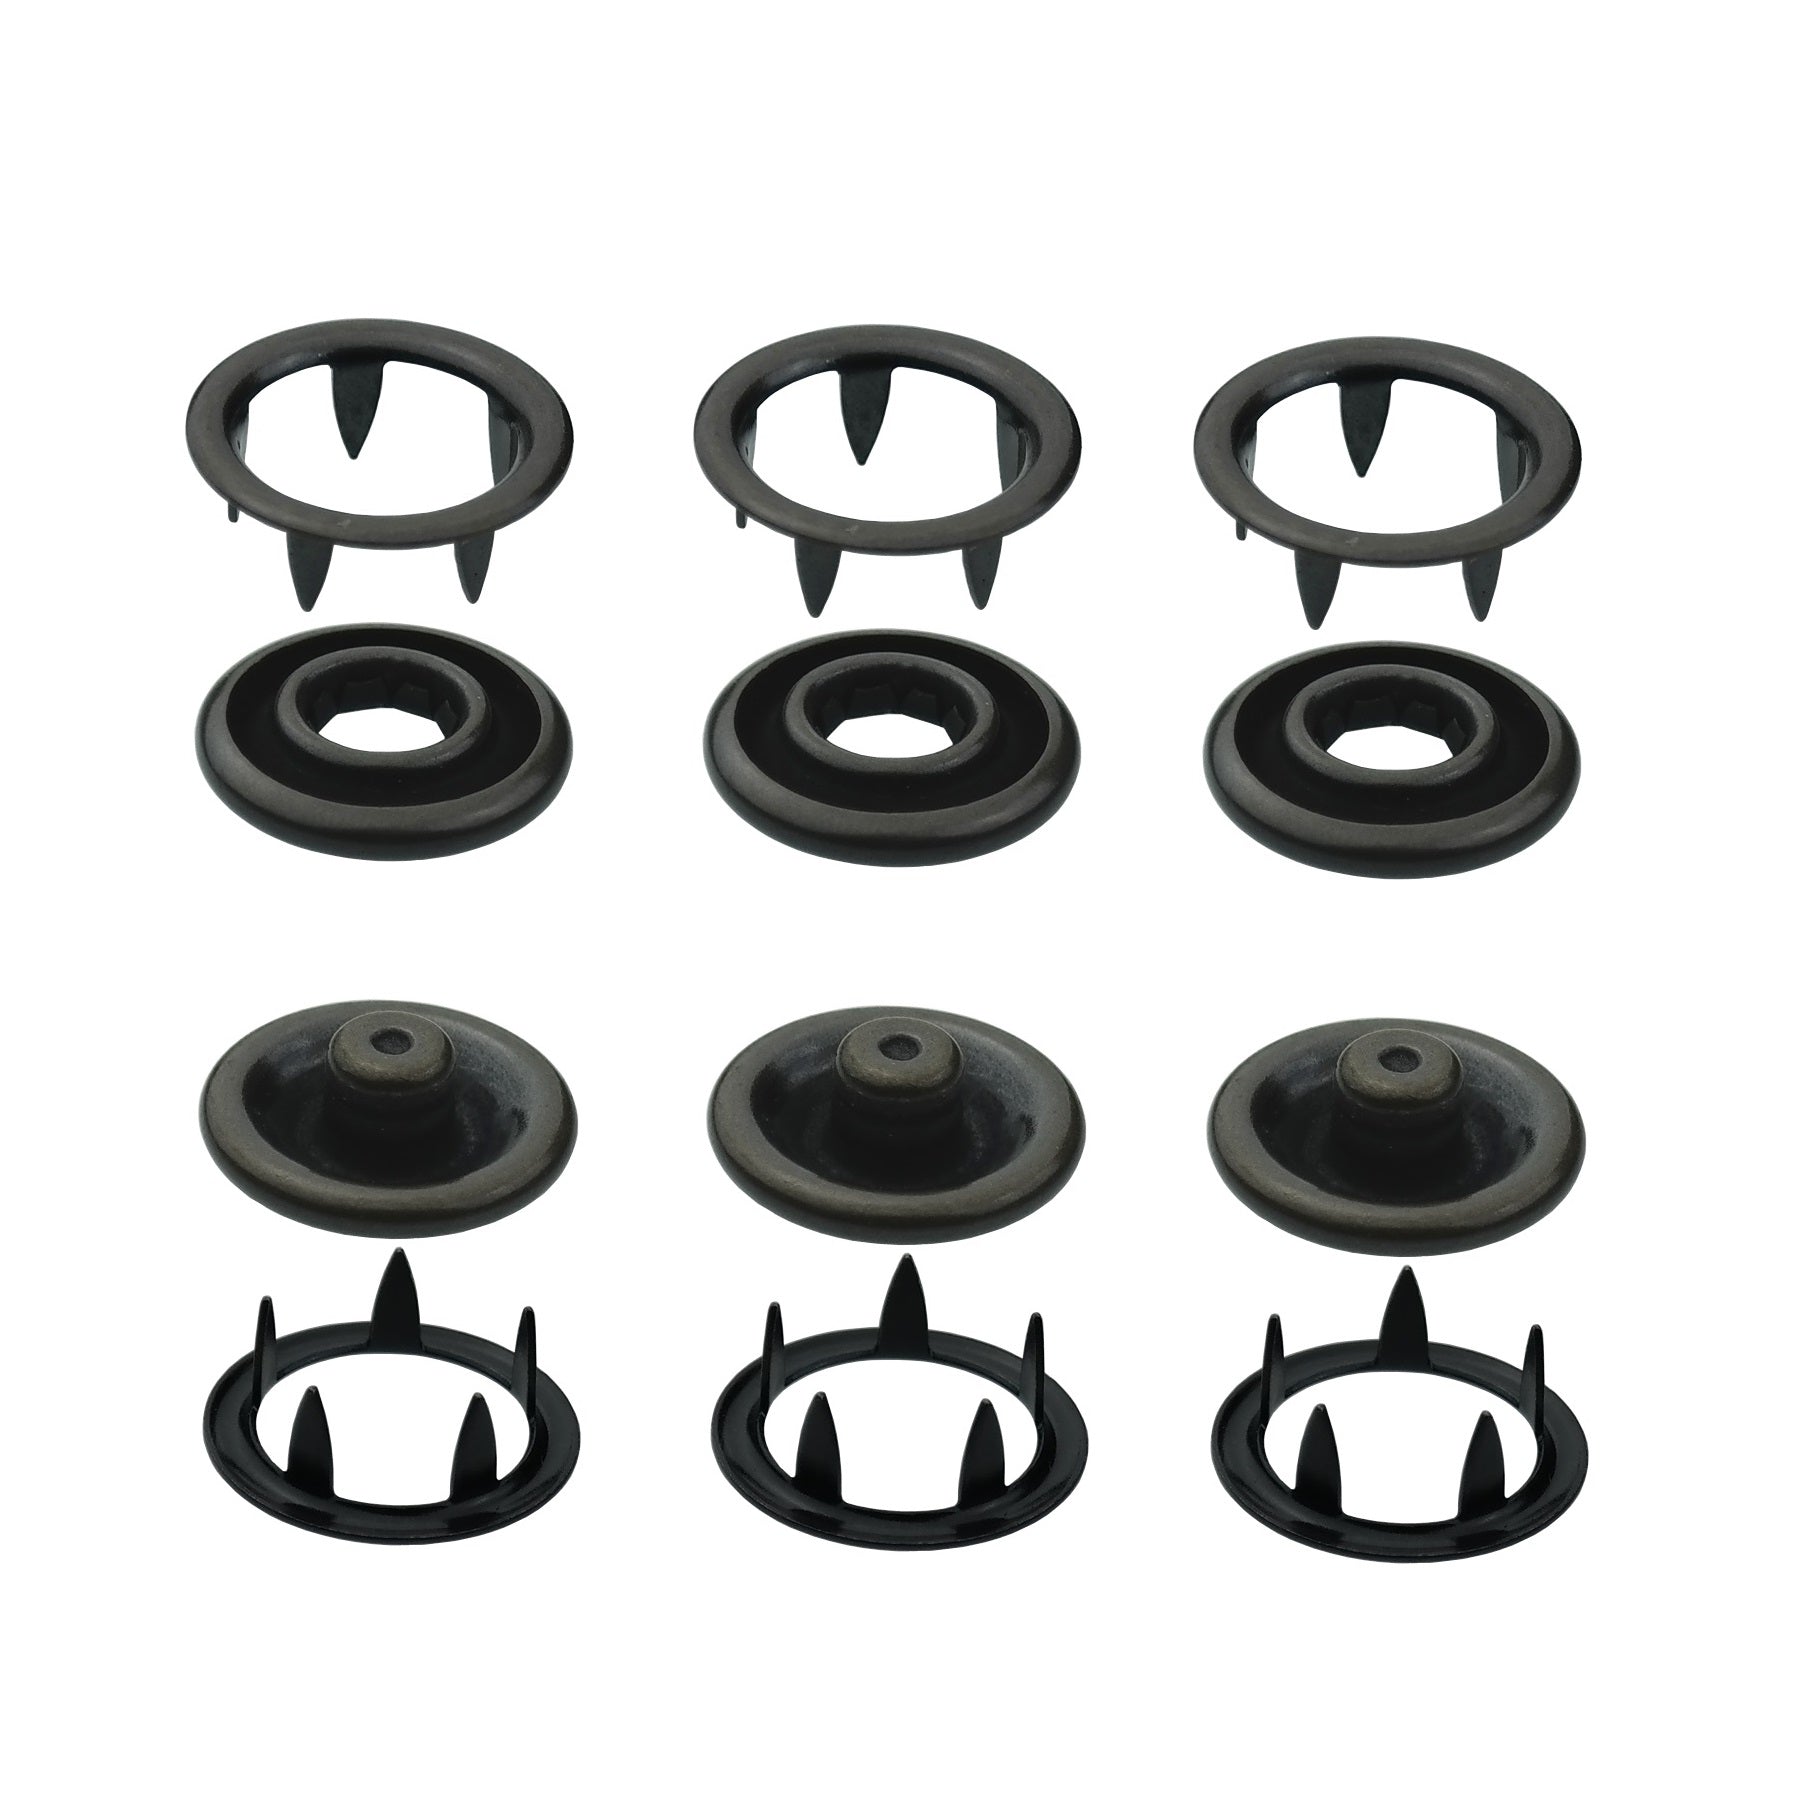 Snap fasteners jersey, rustproof metal buttons in 7 sizes - IstaBreeze®  Germany GmbH